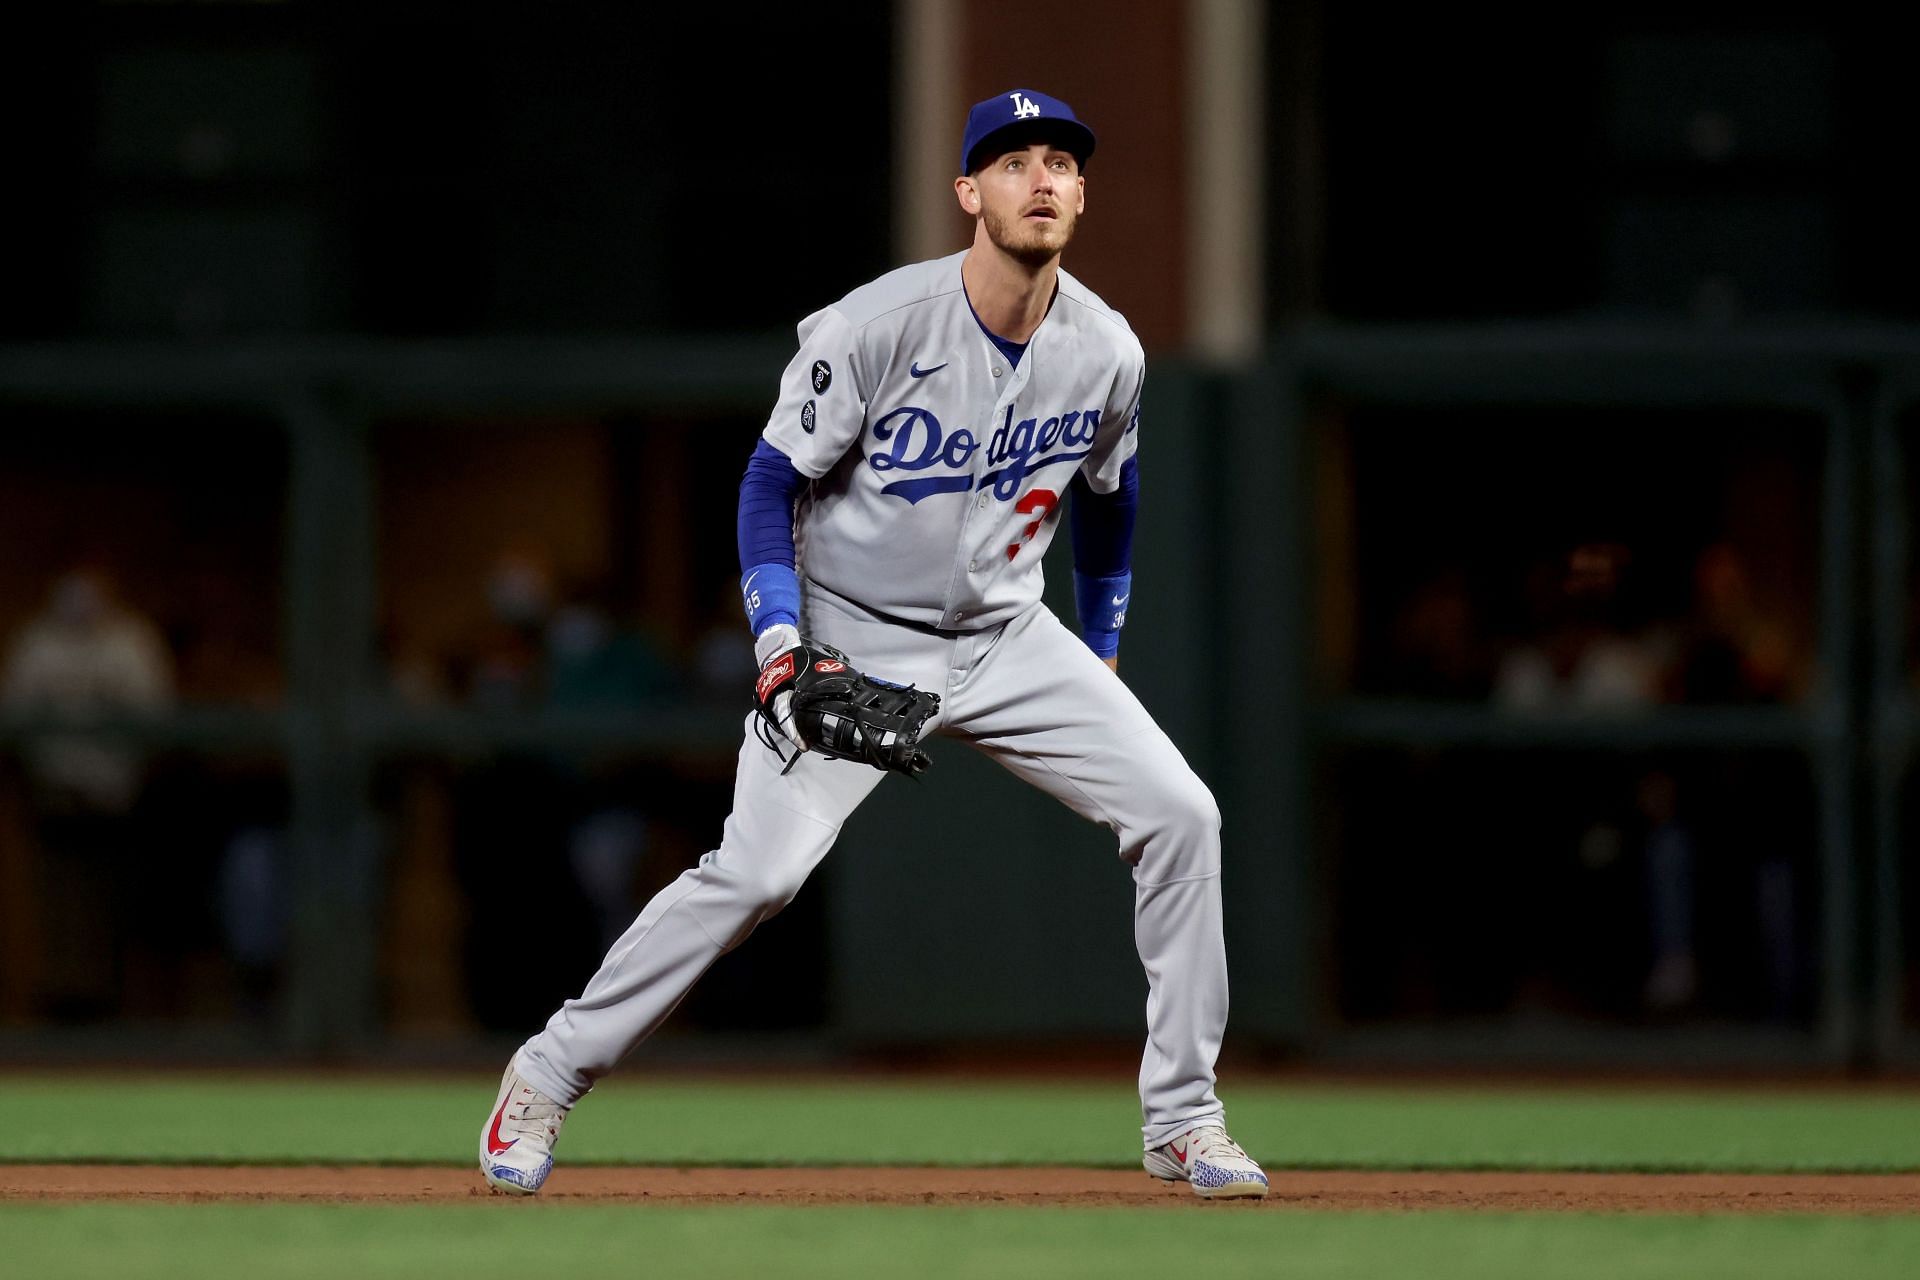 Chicago Cubs outfielder Cody Bellinger learned first base in a